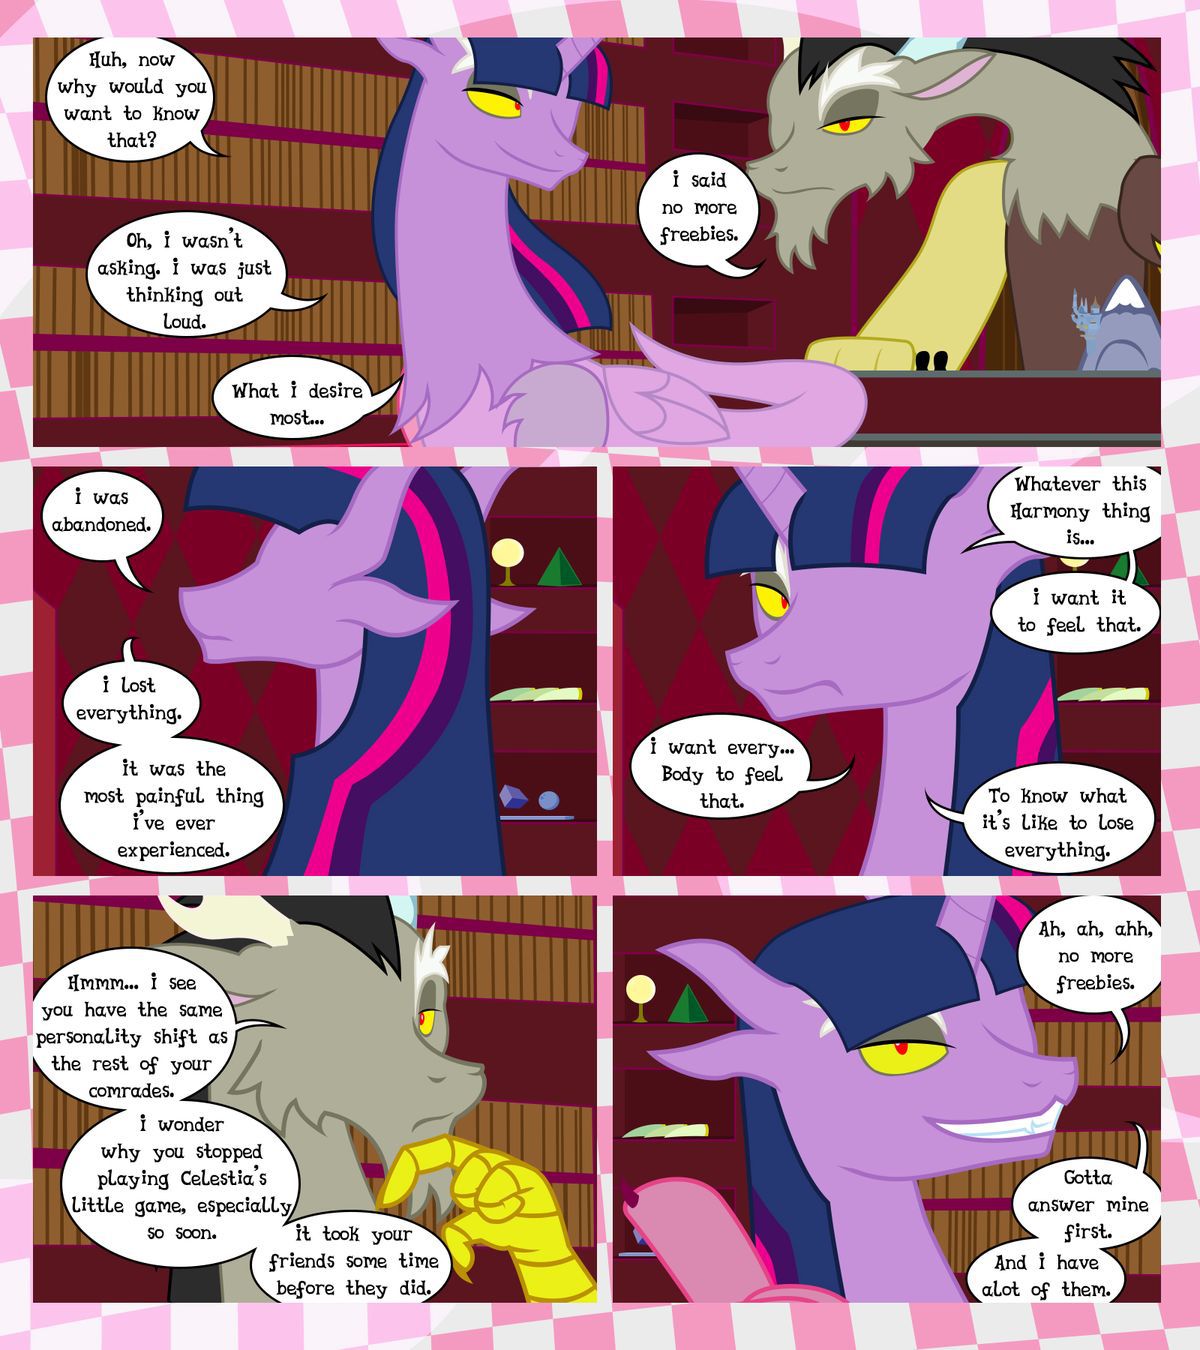 [GatesMcCloud] Cutie Mark Crusaders 10k: Chapter 3 - The Lost (My Little Pony: Friendship is Magic) [English] [Ongoing] 27